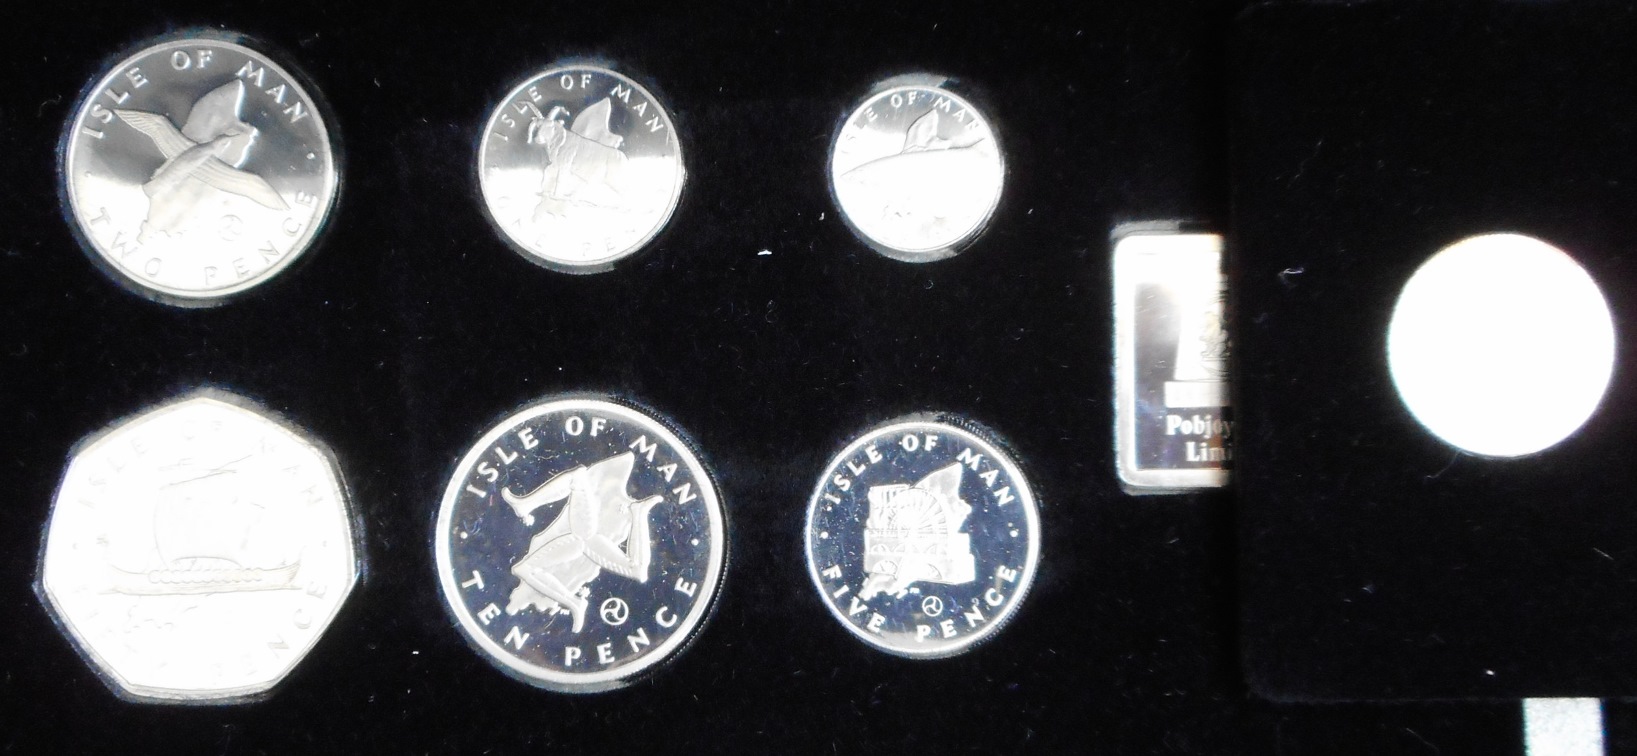 Isle of Man. (2) 1979 set of coins. Silver Proof. 1979 set of five crowns. B.Unc. Both cased.